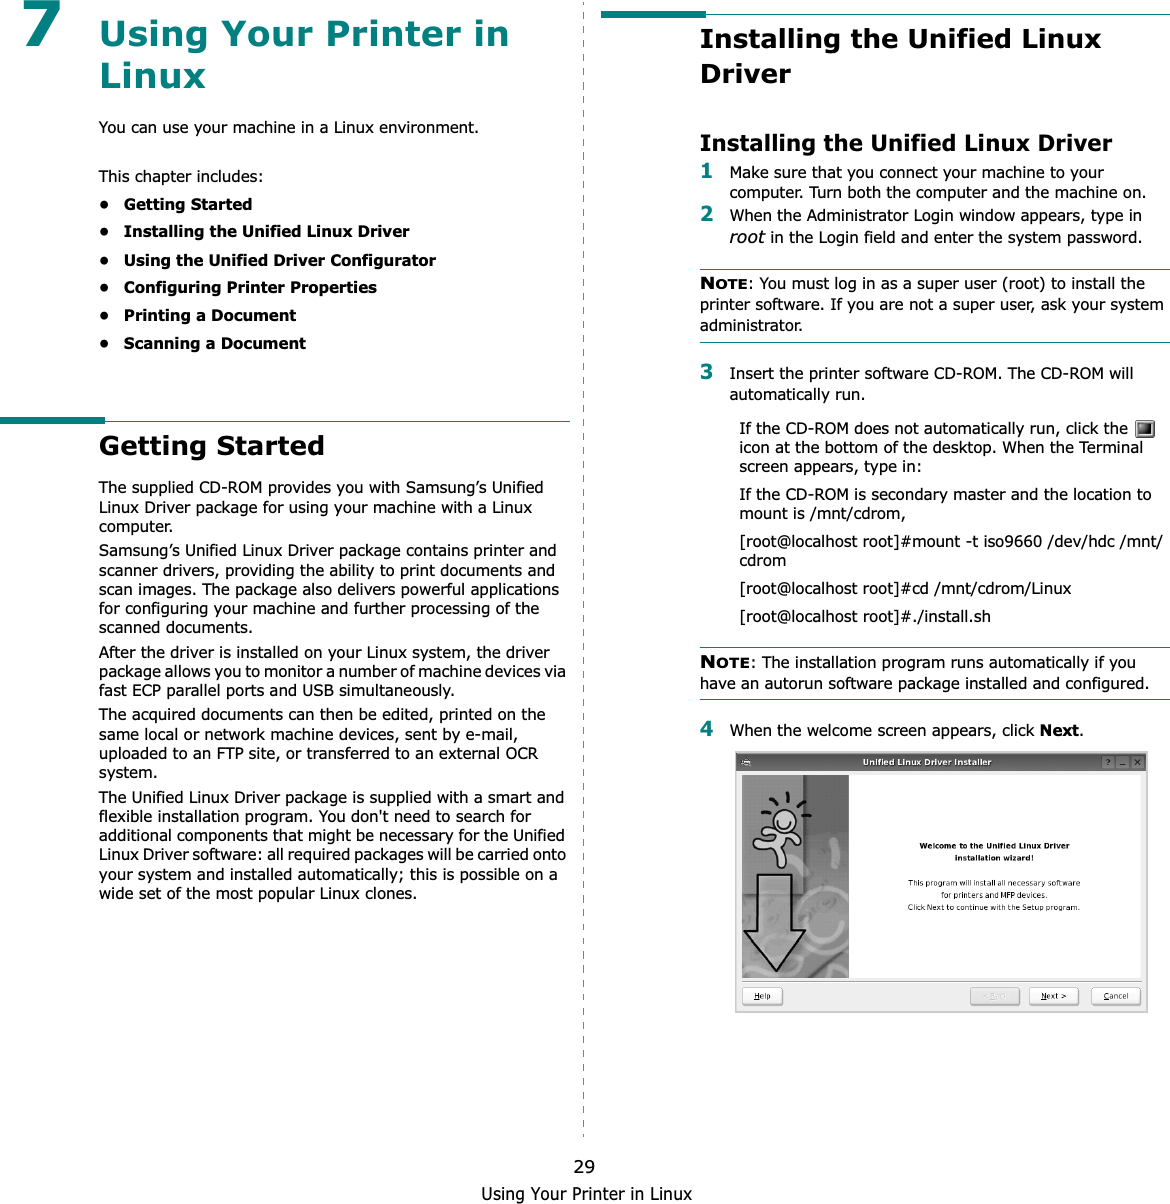 Using Your Printer in Linux297Using Your Printer in LinuxYou can use your machine in a Linux environment. This chapter includes:• Getting Started• Installing the Unified Linux Driver• Using the Unified Driver Configurator• Configuring Printer Properties• Printing a Document• Scanning a DocumentGetting StartedThe supplied CD-ROM provides you with Samsung’s Unified Linux Driver package for using your machine with a Linux computer.Samsung’s Unified Linux Driver package contains printer and scanner drivers, providing the ability to print documents and scan images. The package also delivers powerful applications for configuring your machine and further processing of the scanned documents.After the driver is installed on your Linux system, the driver package allows you to monitor a number of machine devices via fast ECP parallel ports and USB simultaneously. The acquired documents can then be edited, printed on the same local or network machine devices, sent by e-mail, uploaded to an FTP site, or transferred to an external OCR system.The Unified Linux Driver package is supplied with a smart and flexible installation program. You don&apos;t need to search for additional components that might be necessary for the Unified Linux Driver software: all required packages will be carried onto your system and installed automatically; this is possible on a wide set of the most popular Linux clones.Installing the Unified Linux DriverInstalling the Unified Linux Driver1Make sure that you connect your machine to your computer. Turn both the computer and the machine on.2When the Administrator Login window appears, type in root in the Login field and enter the system password.NOTE: You must log in as a super user (root) to install the printer software. If you are not a super user, ask your system administrator.3Insert the printer software CD-ROM. The CD-ROM will automatically run.If the CD-ROM does not automatically run, click the   icon at the bottom of the desktop. When the Terminal screen appears, type in:If the CD-ROM is secondary master and the location to mount is /mnt/cdrom,[root@localhost root]#mount -t iso9660 /dev/hdc /mnt/cdrom[root@localhost root]#cd /mnt/cdrom/Linux[root@localhost root]#./install.sh NOTE: The installation program runs automatically if you have an autorun software package installed and configured.4When the welcome screen appears, click Next.